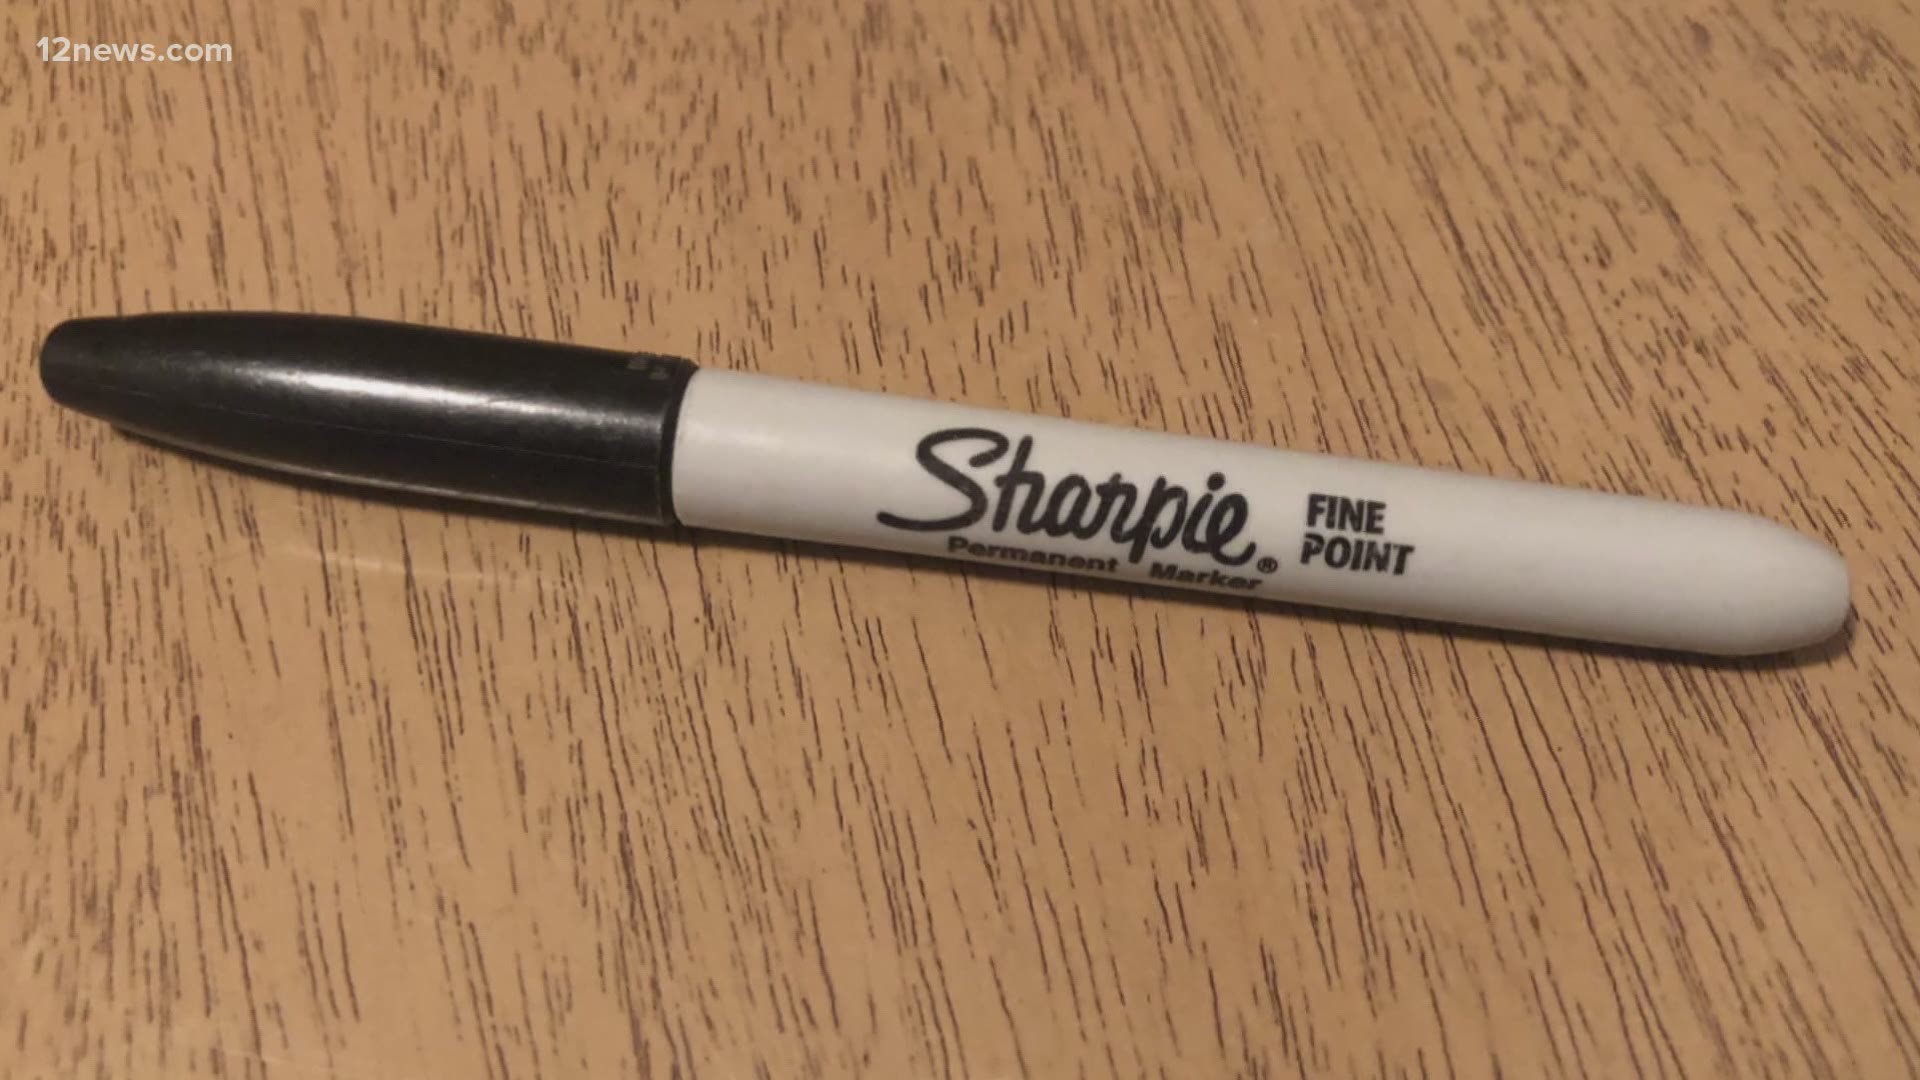 Social media blew up Wednesday with concerns that Sharpie marks on ballots will make a ballot unable to be read by voting machines.